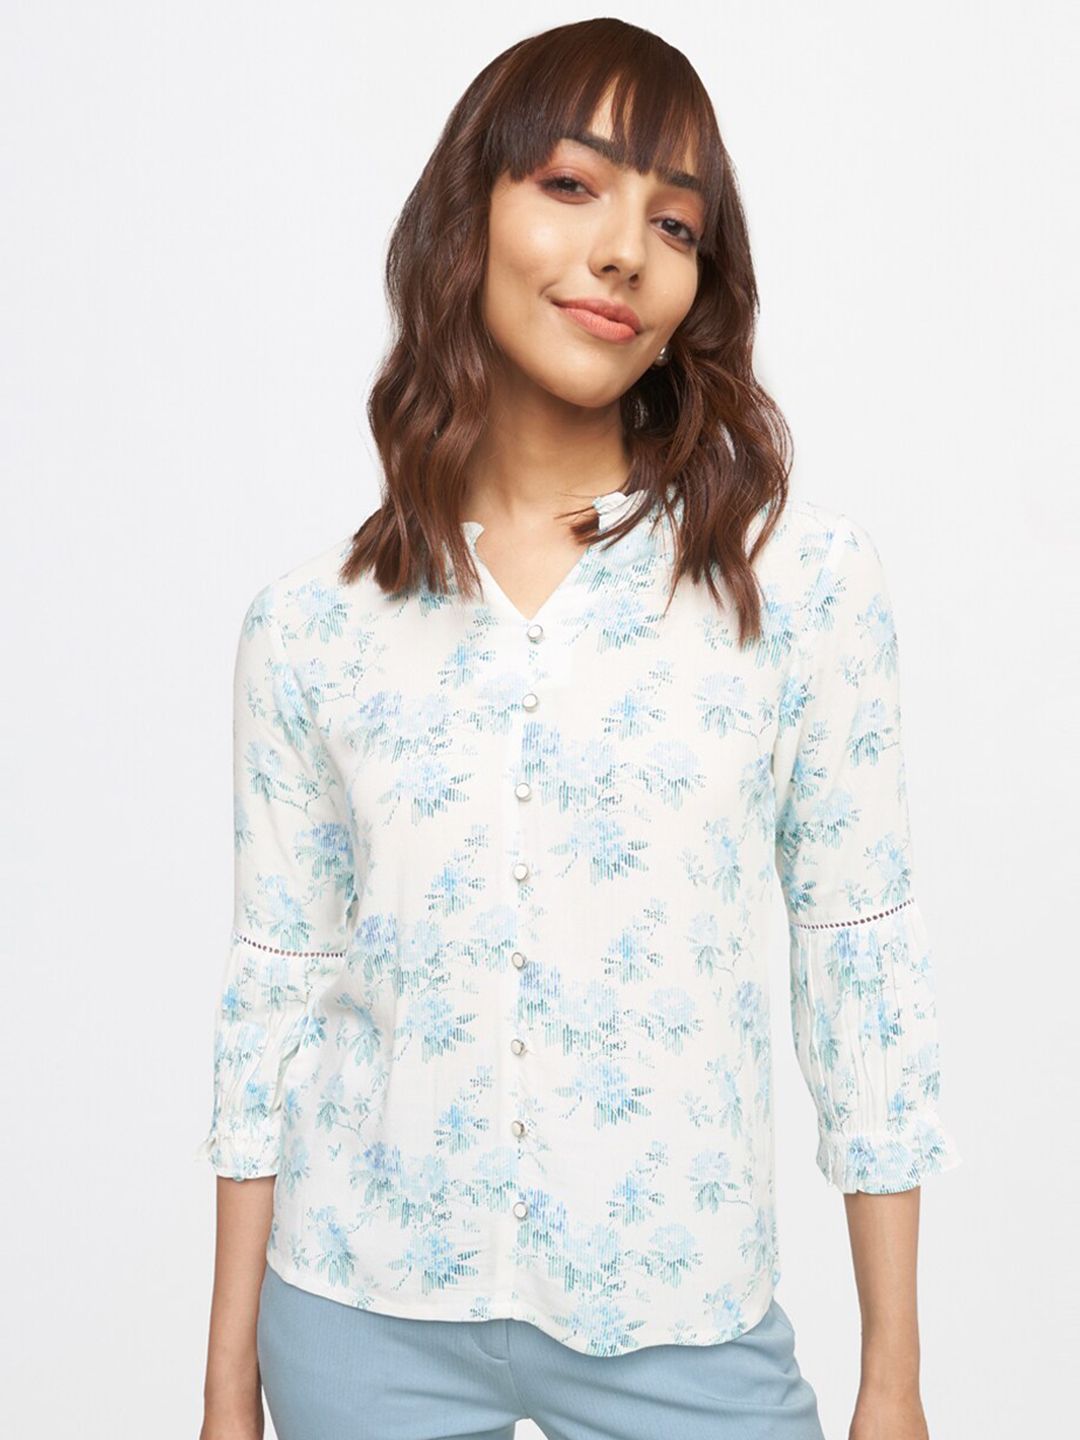 AND White & Blue Floral Print Mandarin Collar Shirt Style Top Price in India